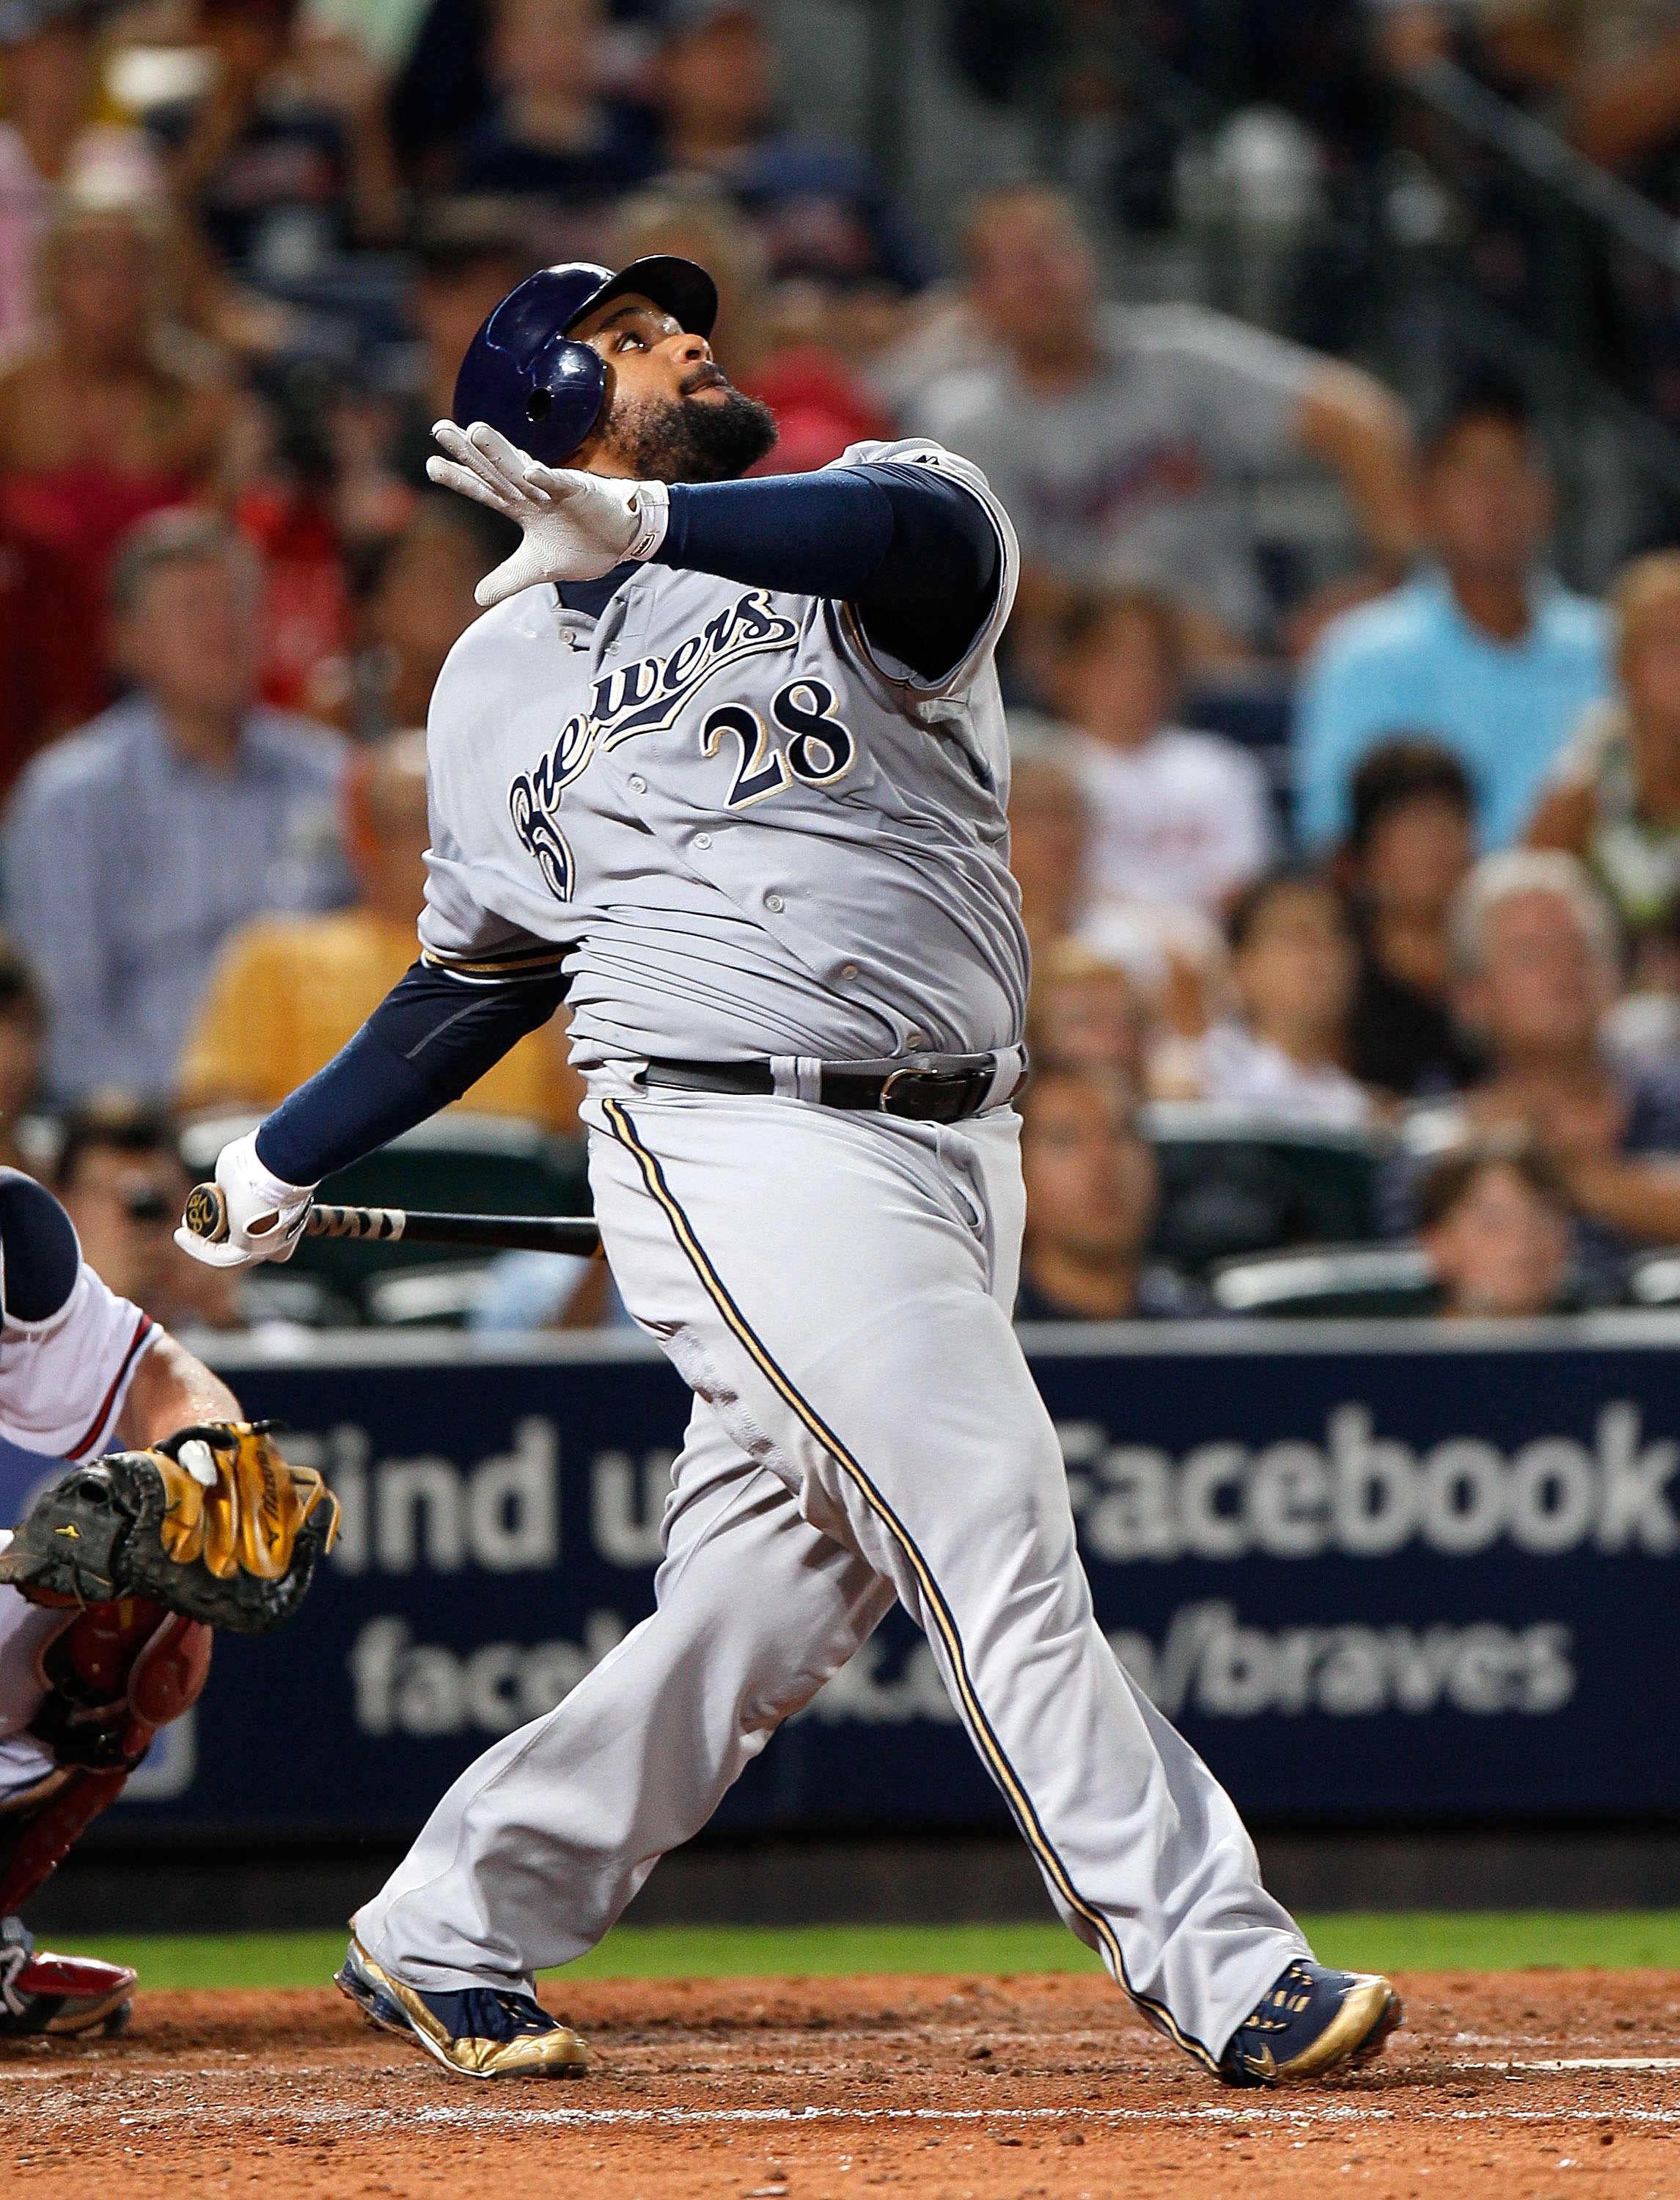 Prince Fielder's Consecutive Games Streak Is Haunting The Team